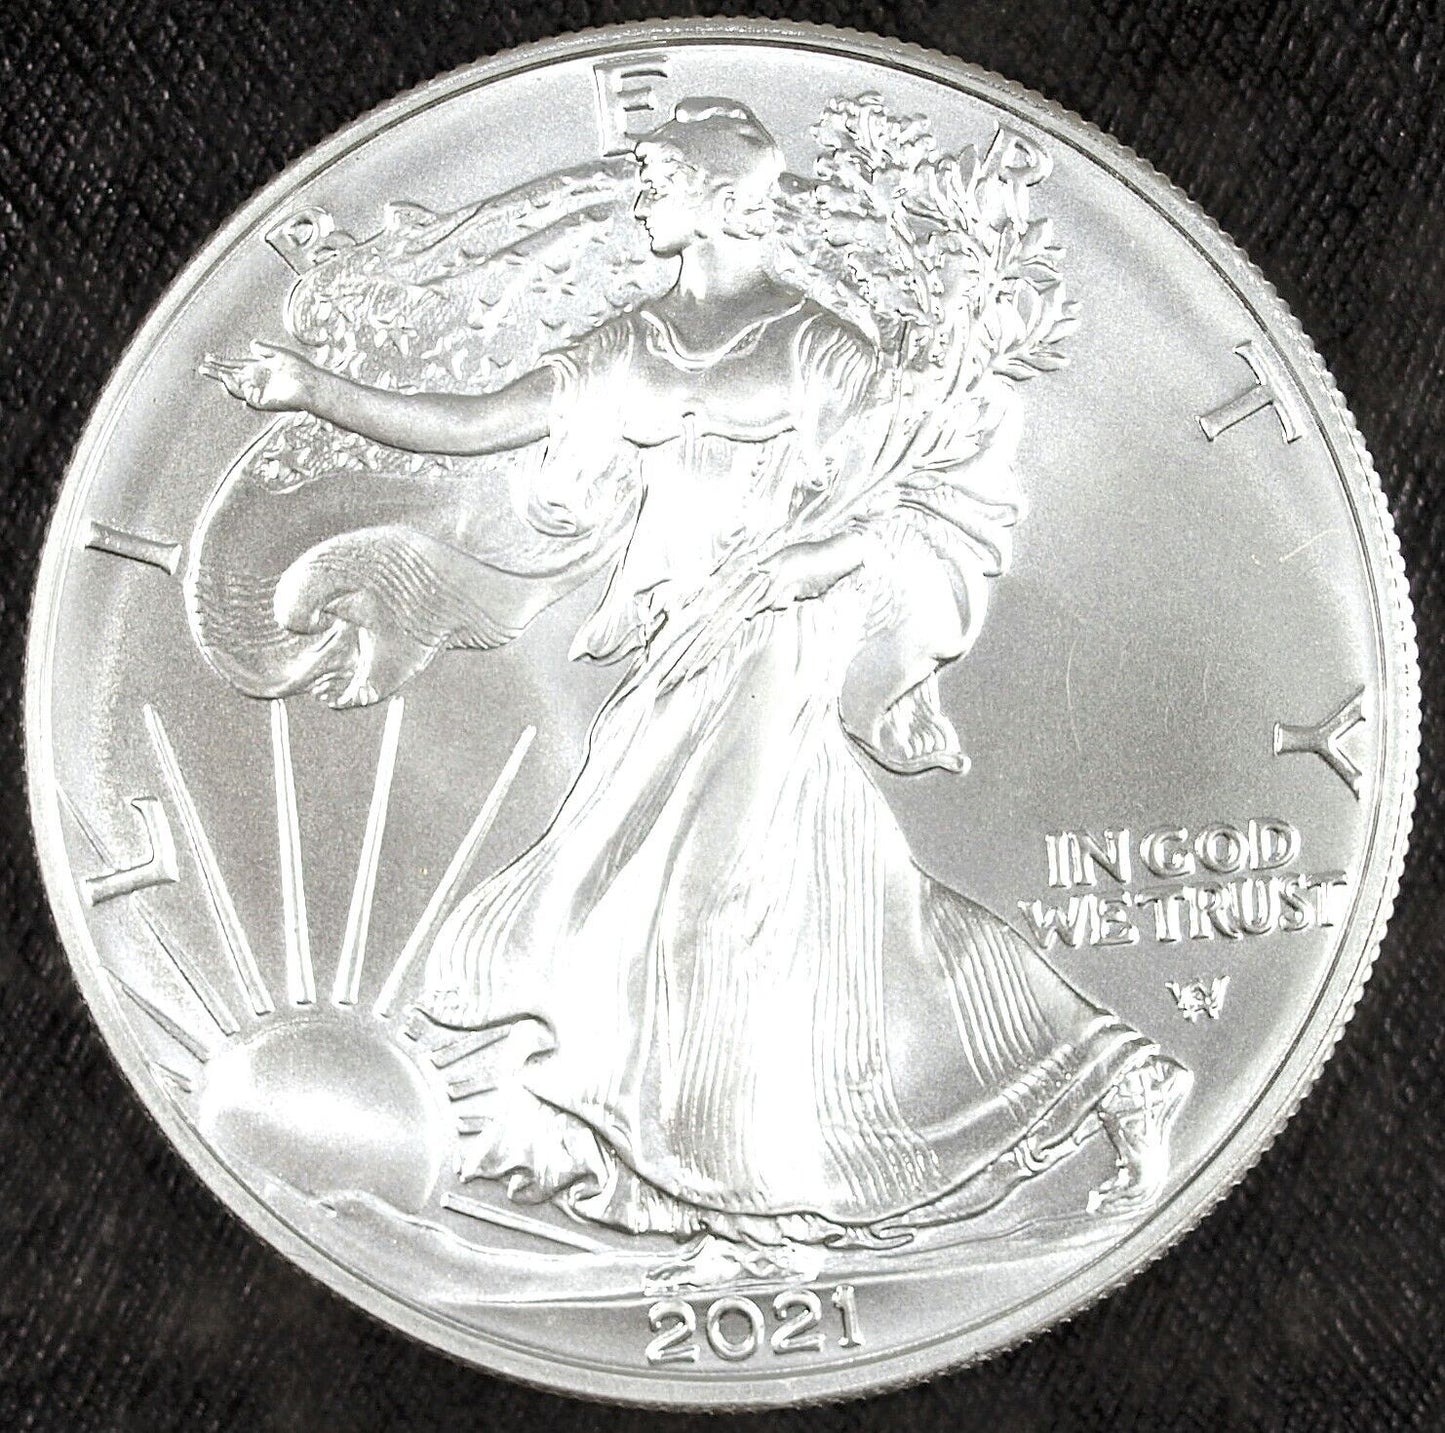 2021 Type 2 U.S. Mint American Silver Eagle ☆☆ Uncirculated ☆☆ Collectible 411